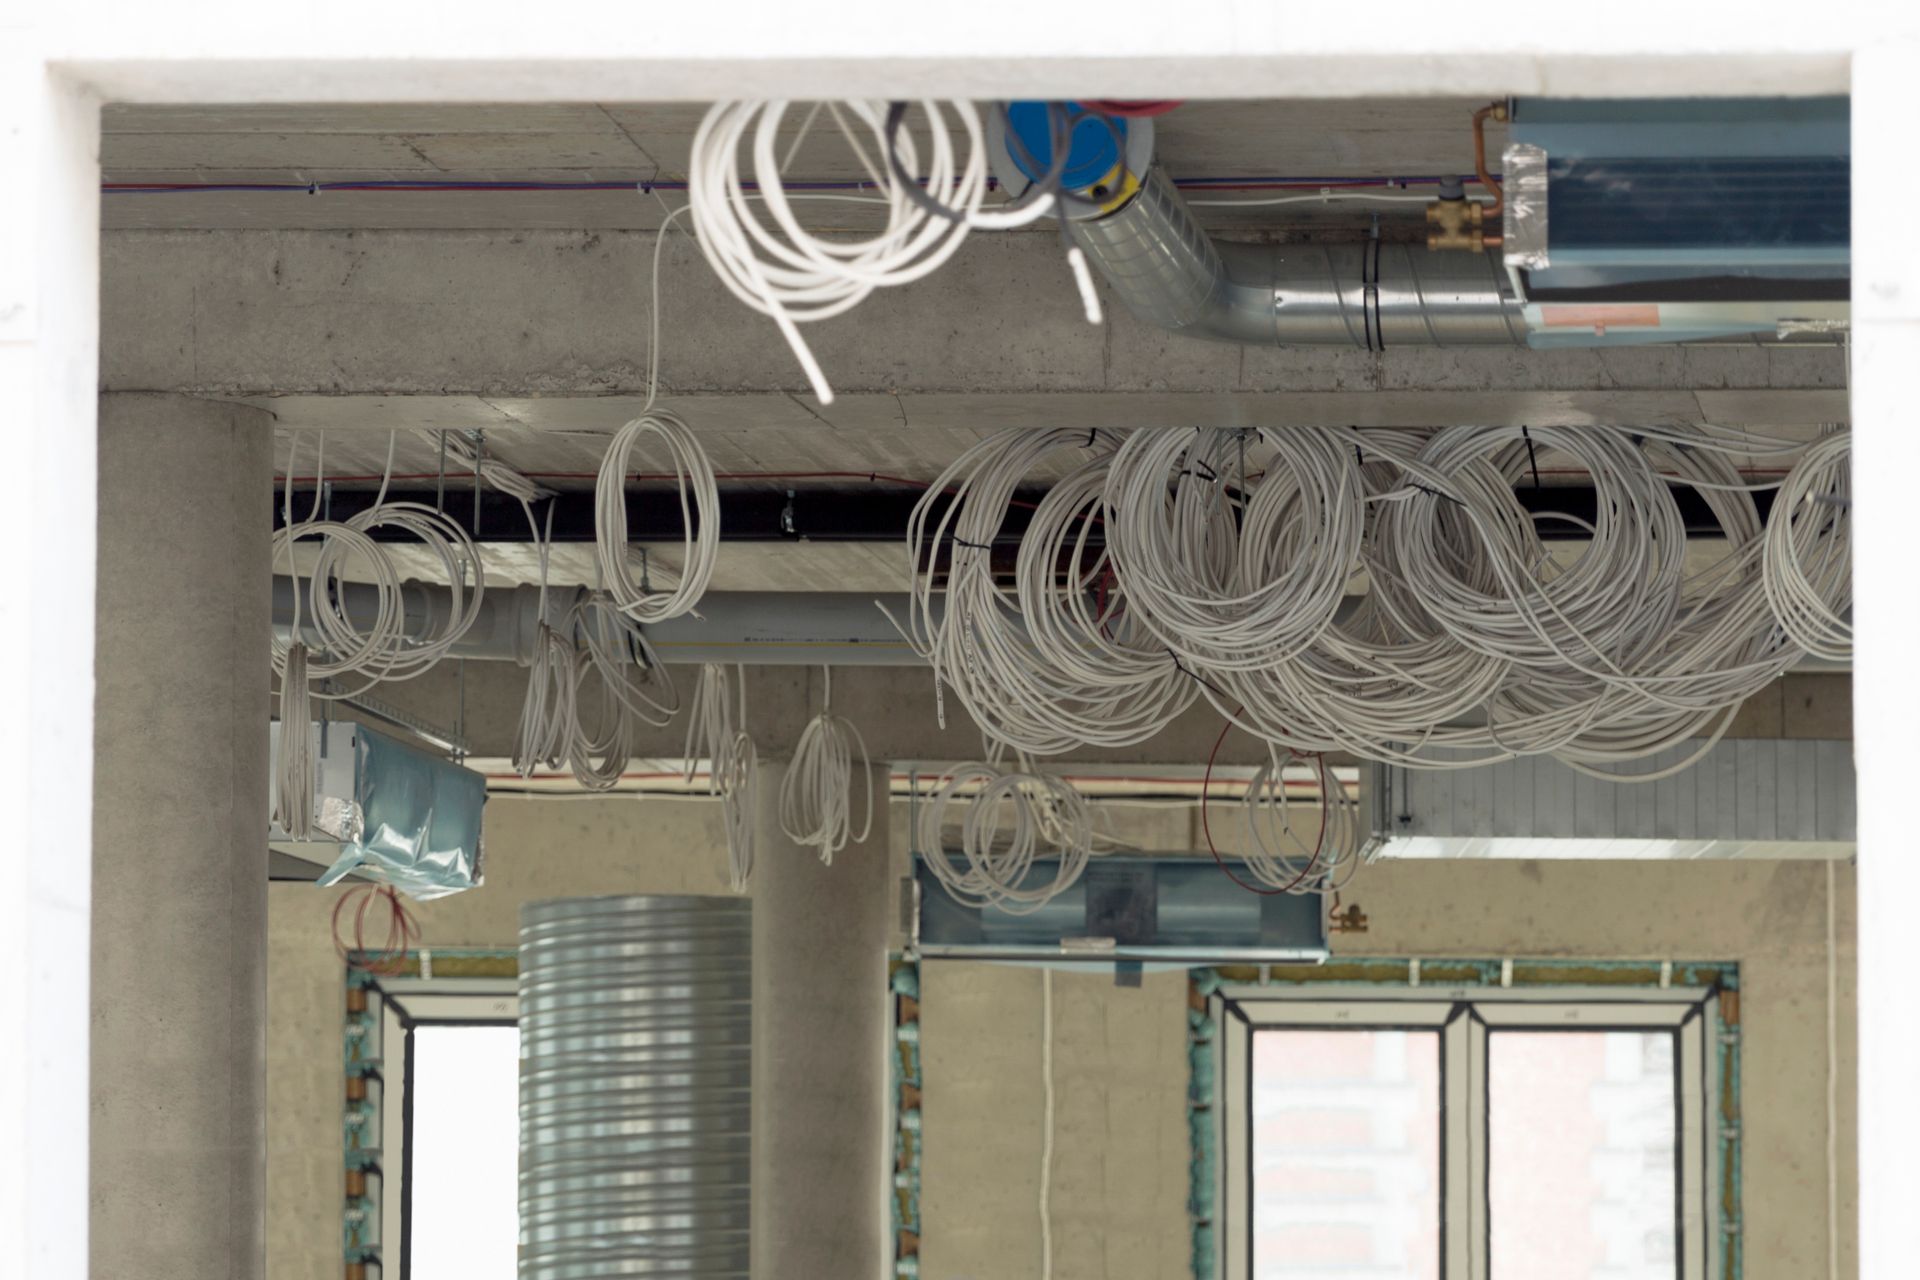 Commercial Wiring Services in Evanston, IL